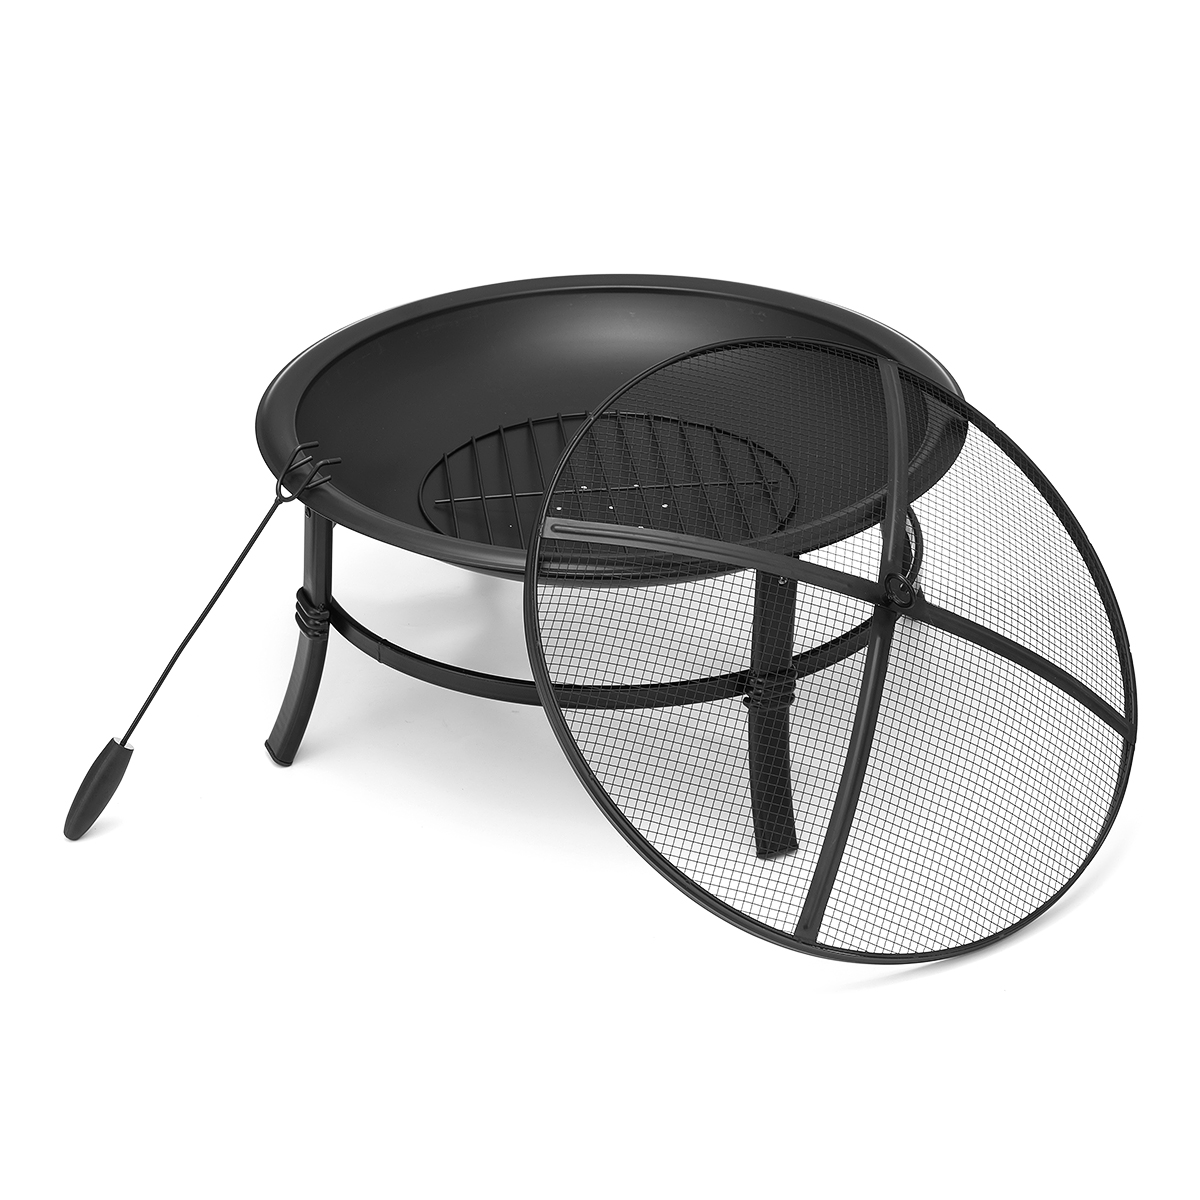 Kingso-26-inch-Fire-Pit-Wood-Burning--Small--Heavy-Duty-Steel-Firepit-with-Spark-Screen-Log-Grate-Po-1822387-7